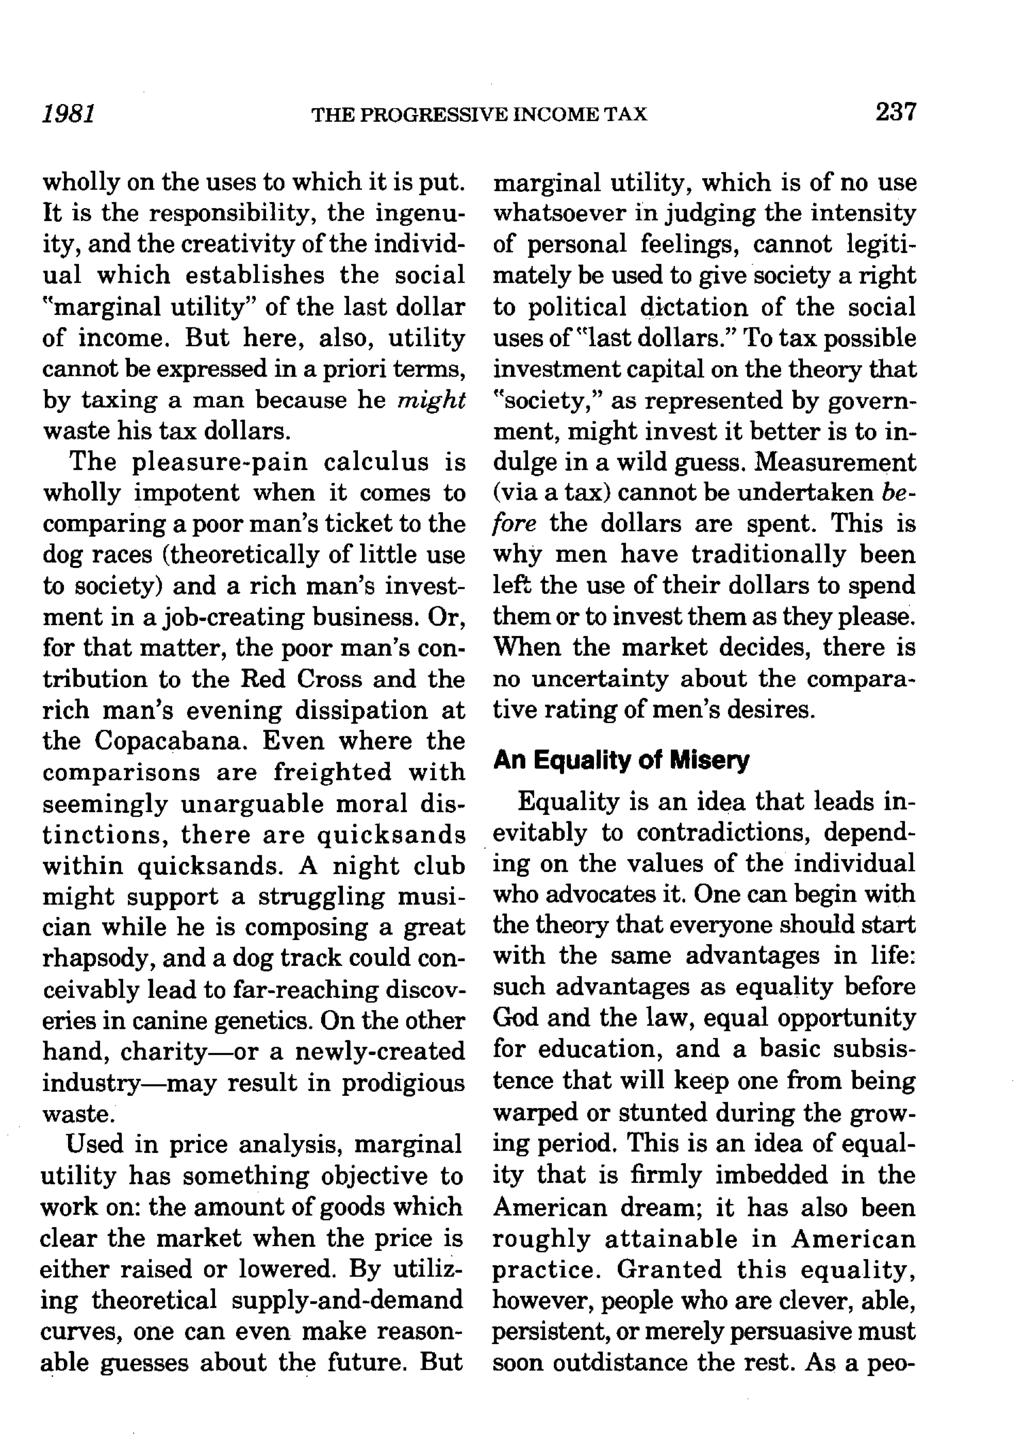 1981 THE PROGRESSIVE INCOME TAX 237 wholly on the uses to which it is put.